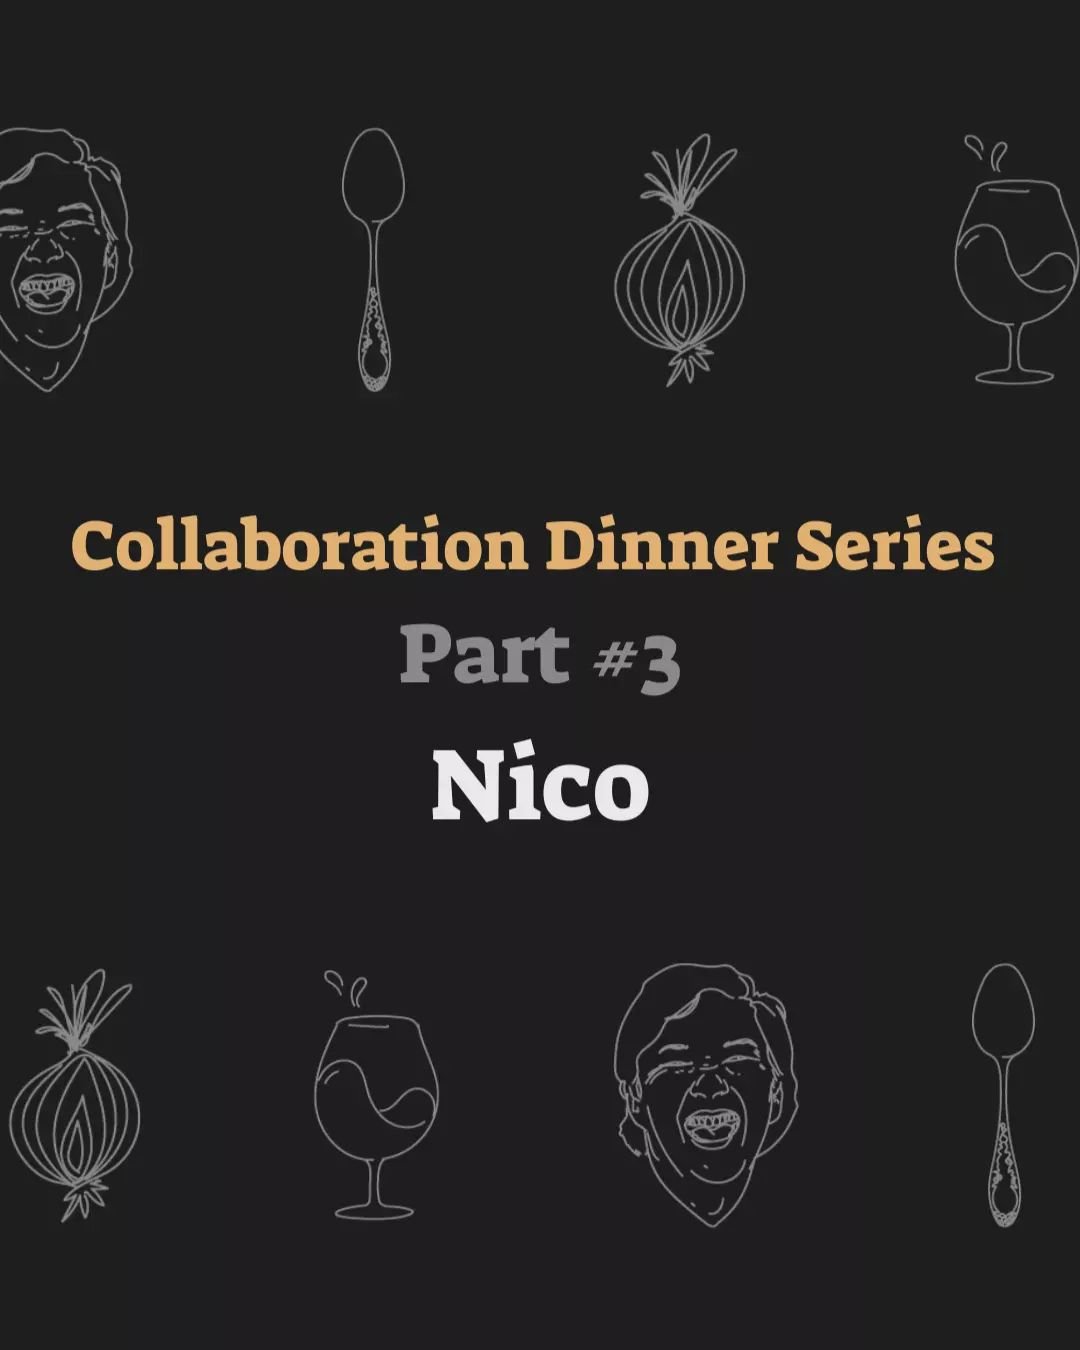 Monday 27th May - Collaboration Dinner Series Part #3! Experience a dinner created by Chef Nicola Ronconi of @nicorestaurant  in Cammeray and our own Chef Alessandro Intini. Expect a menu created with passion, consideration, house made components and